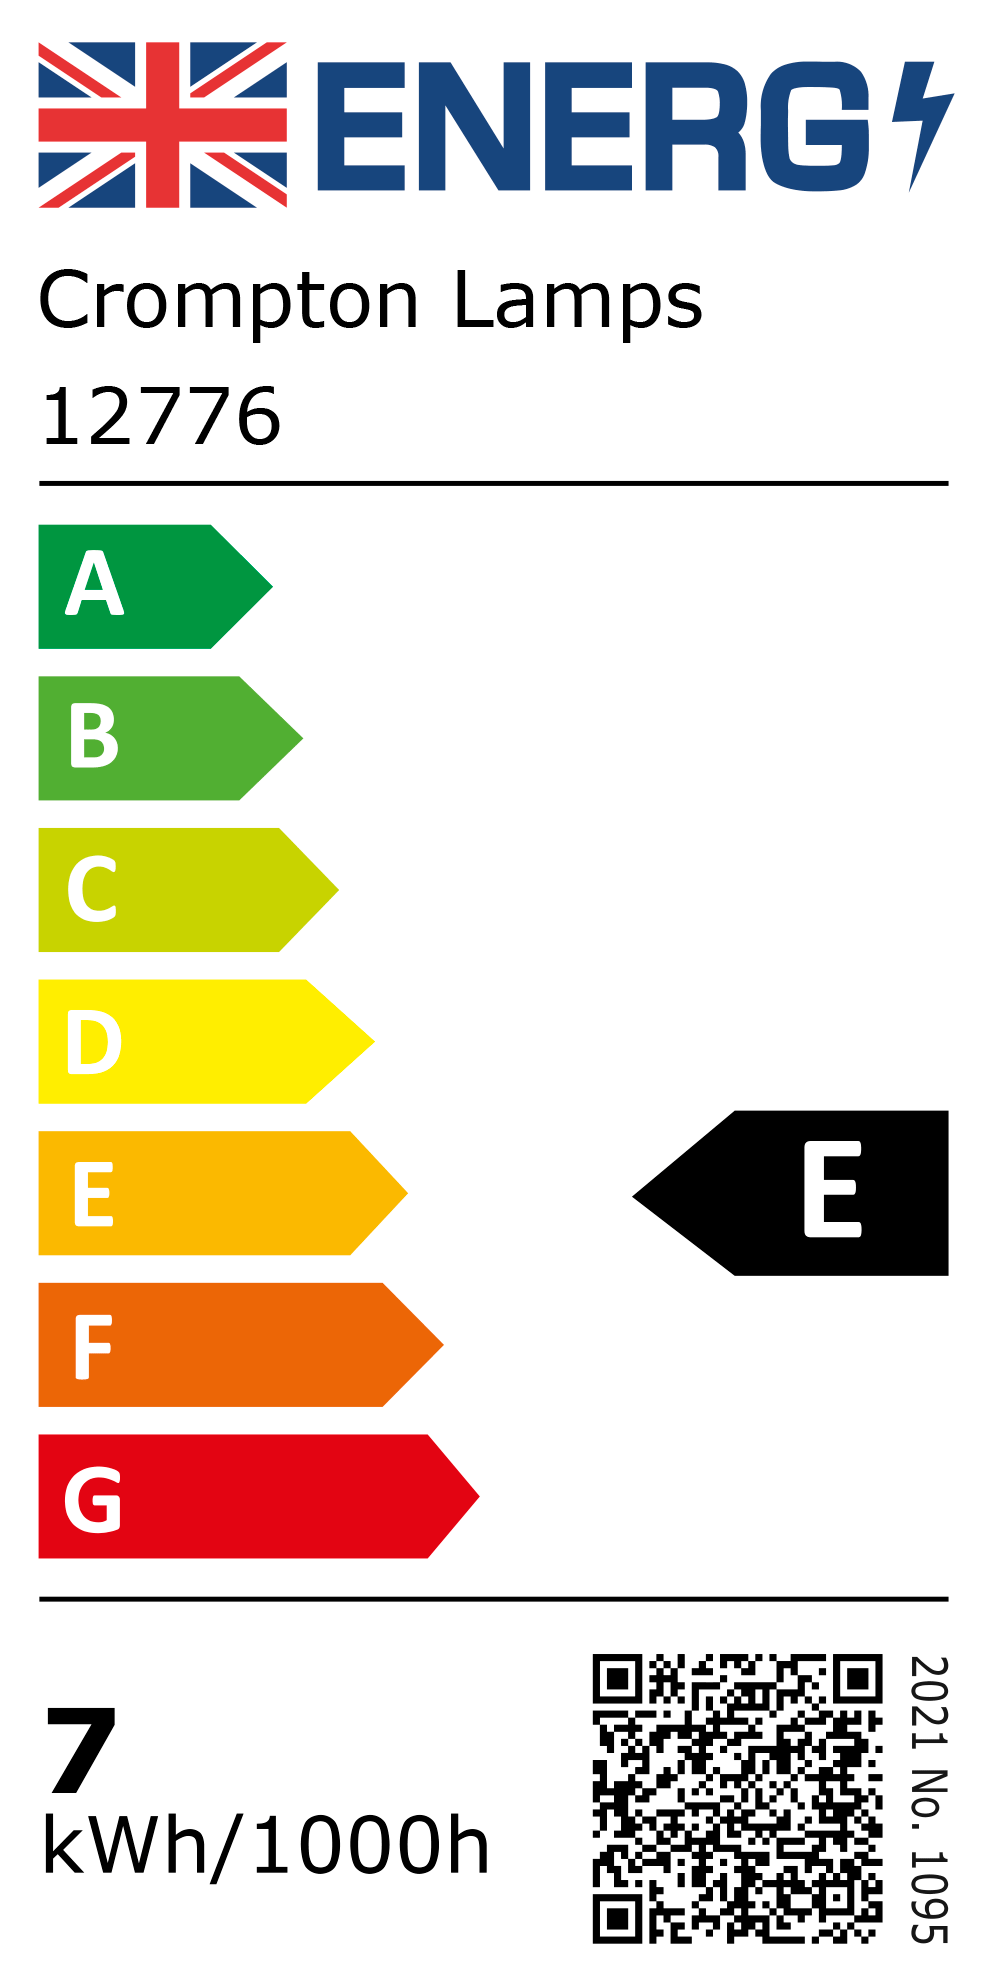 New 2021 Energy Rating Label: Stock Code 12776